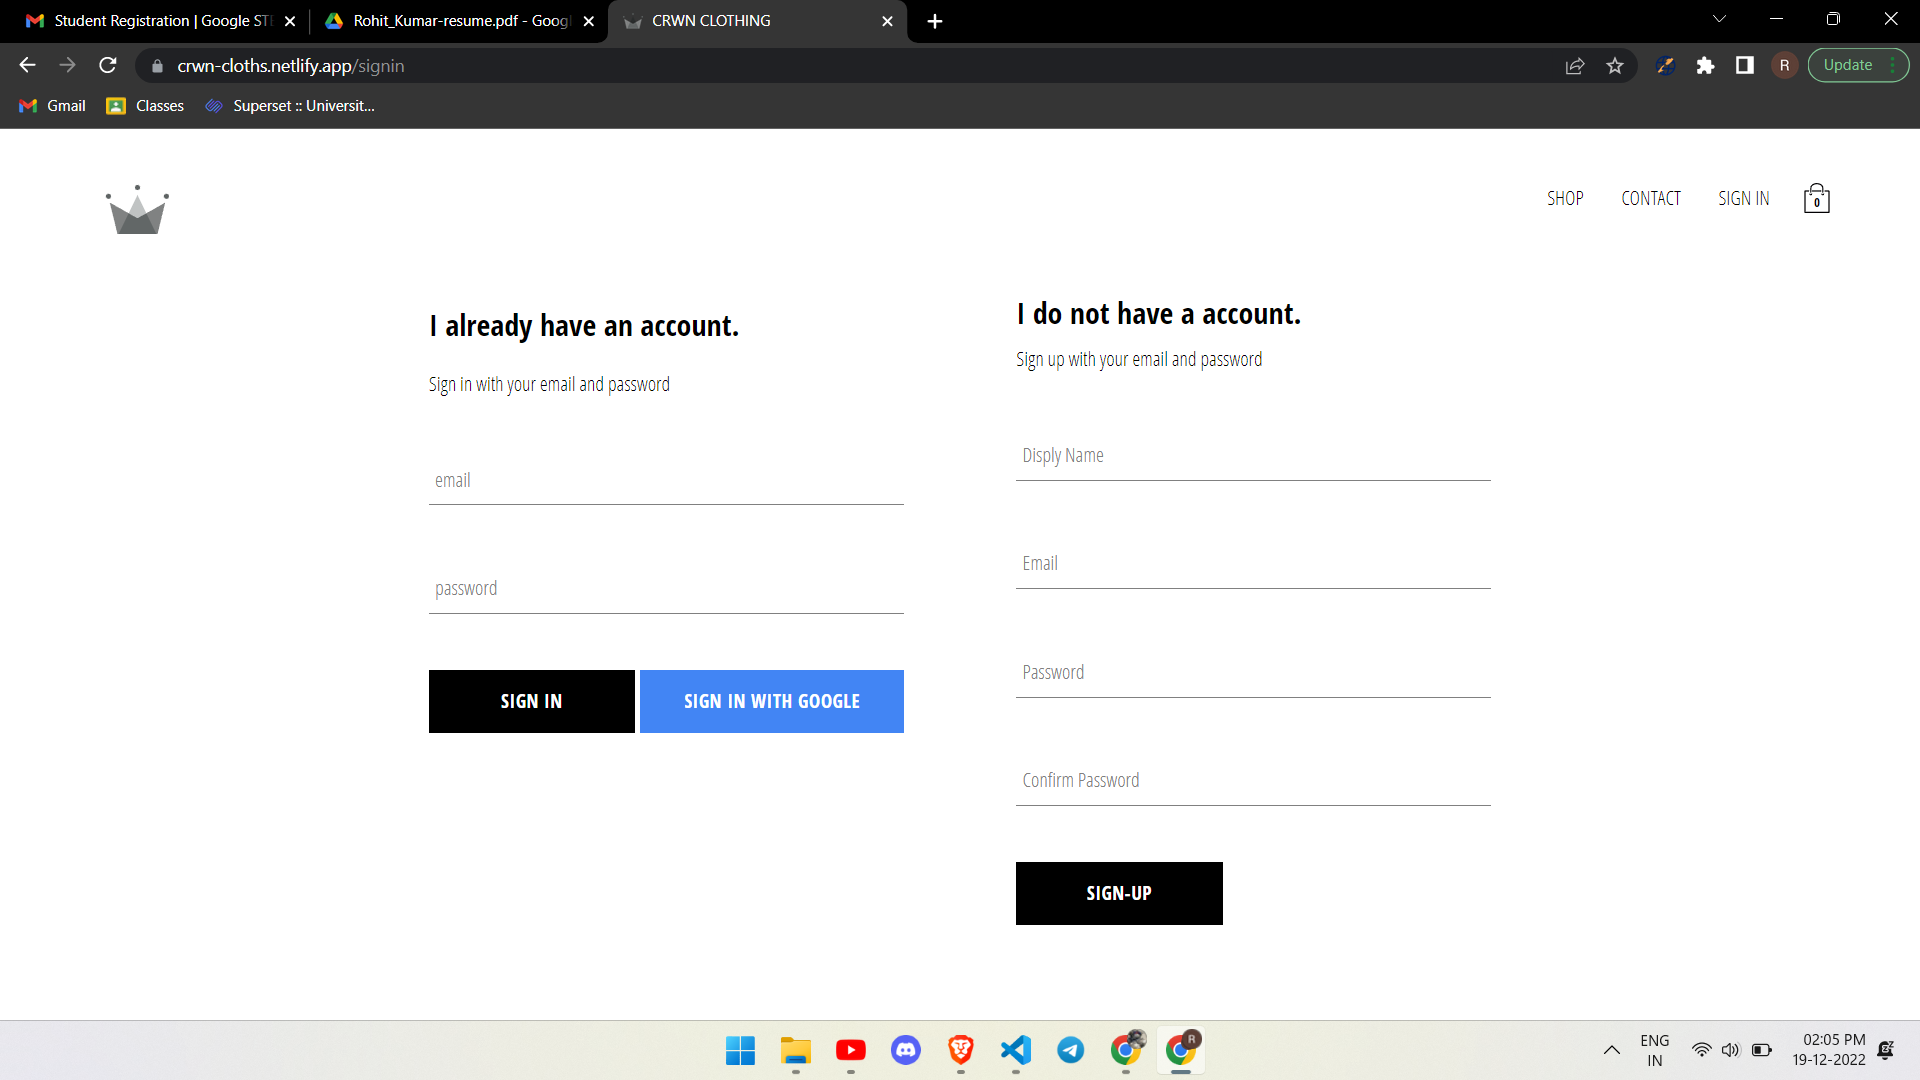 auth-page